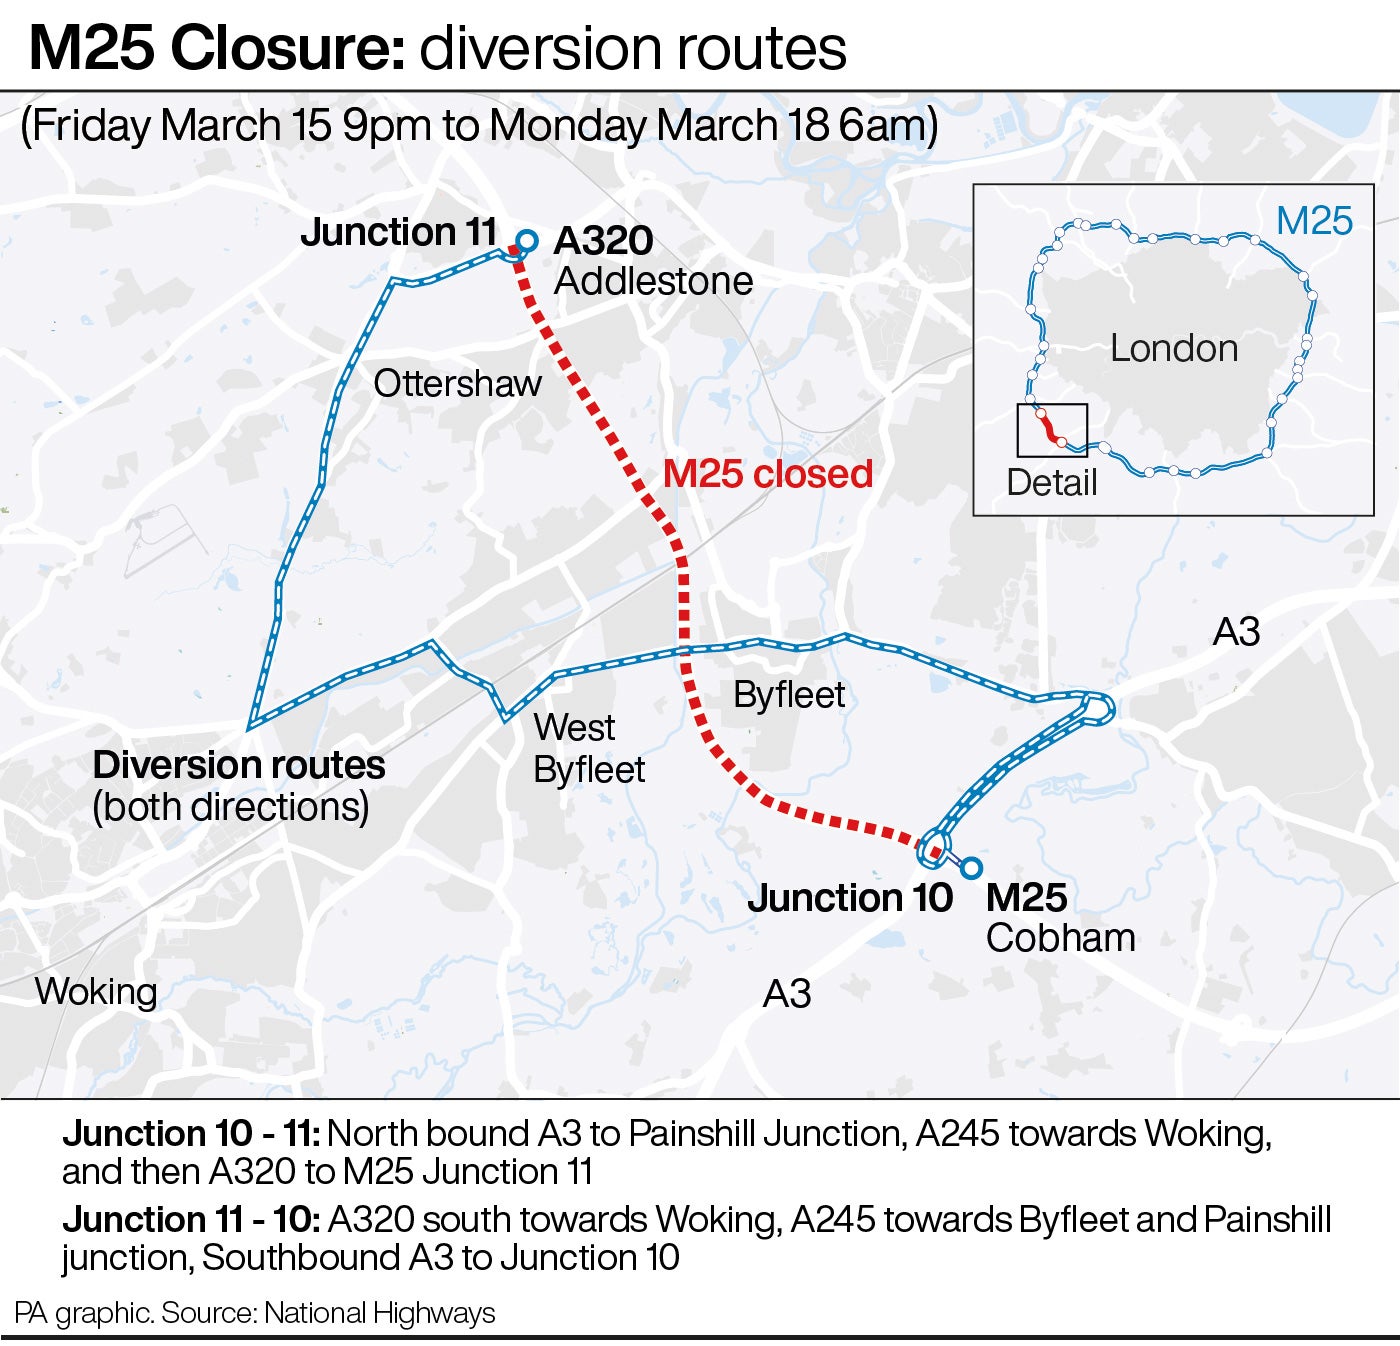 A map of the M25 Closure diversion routes